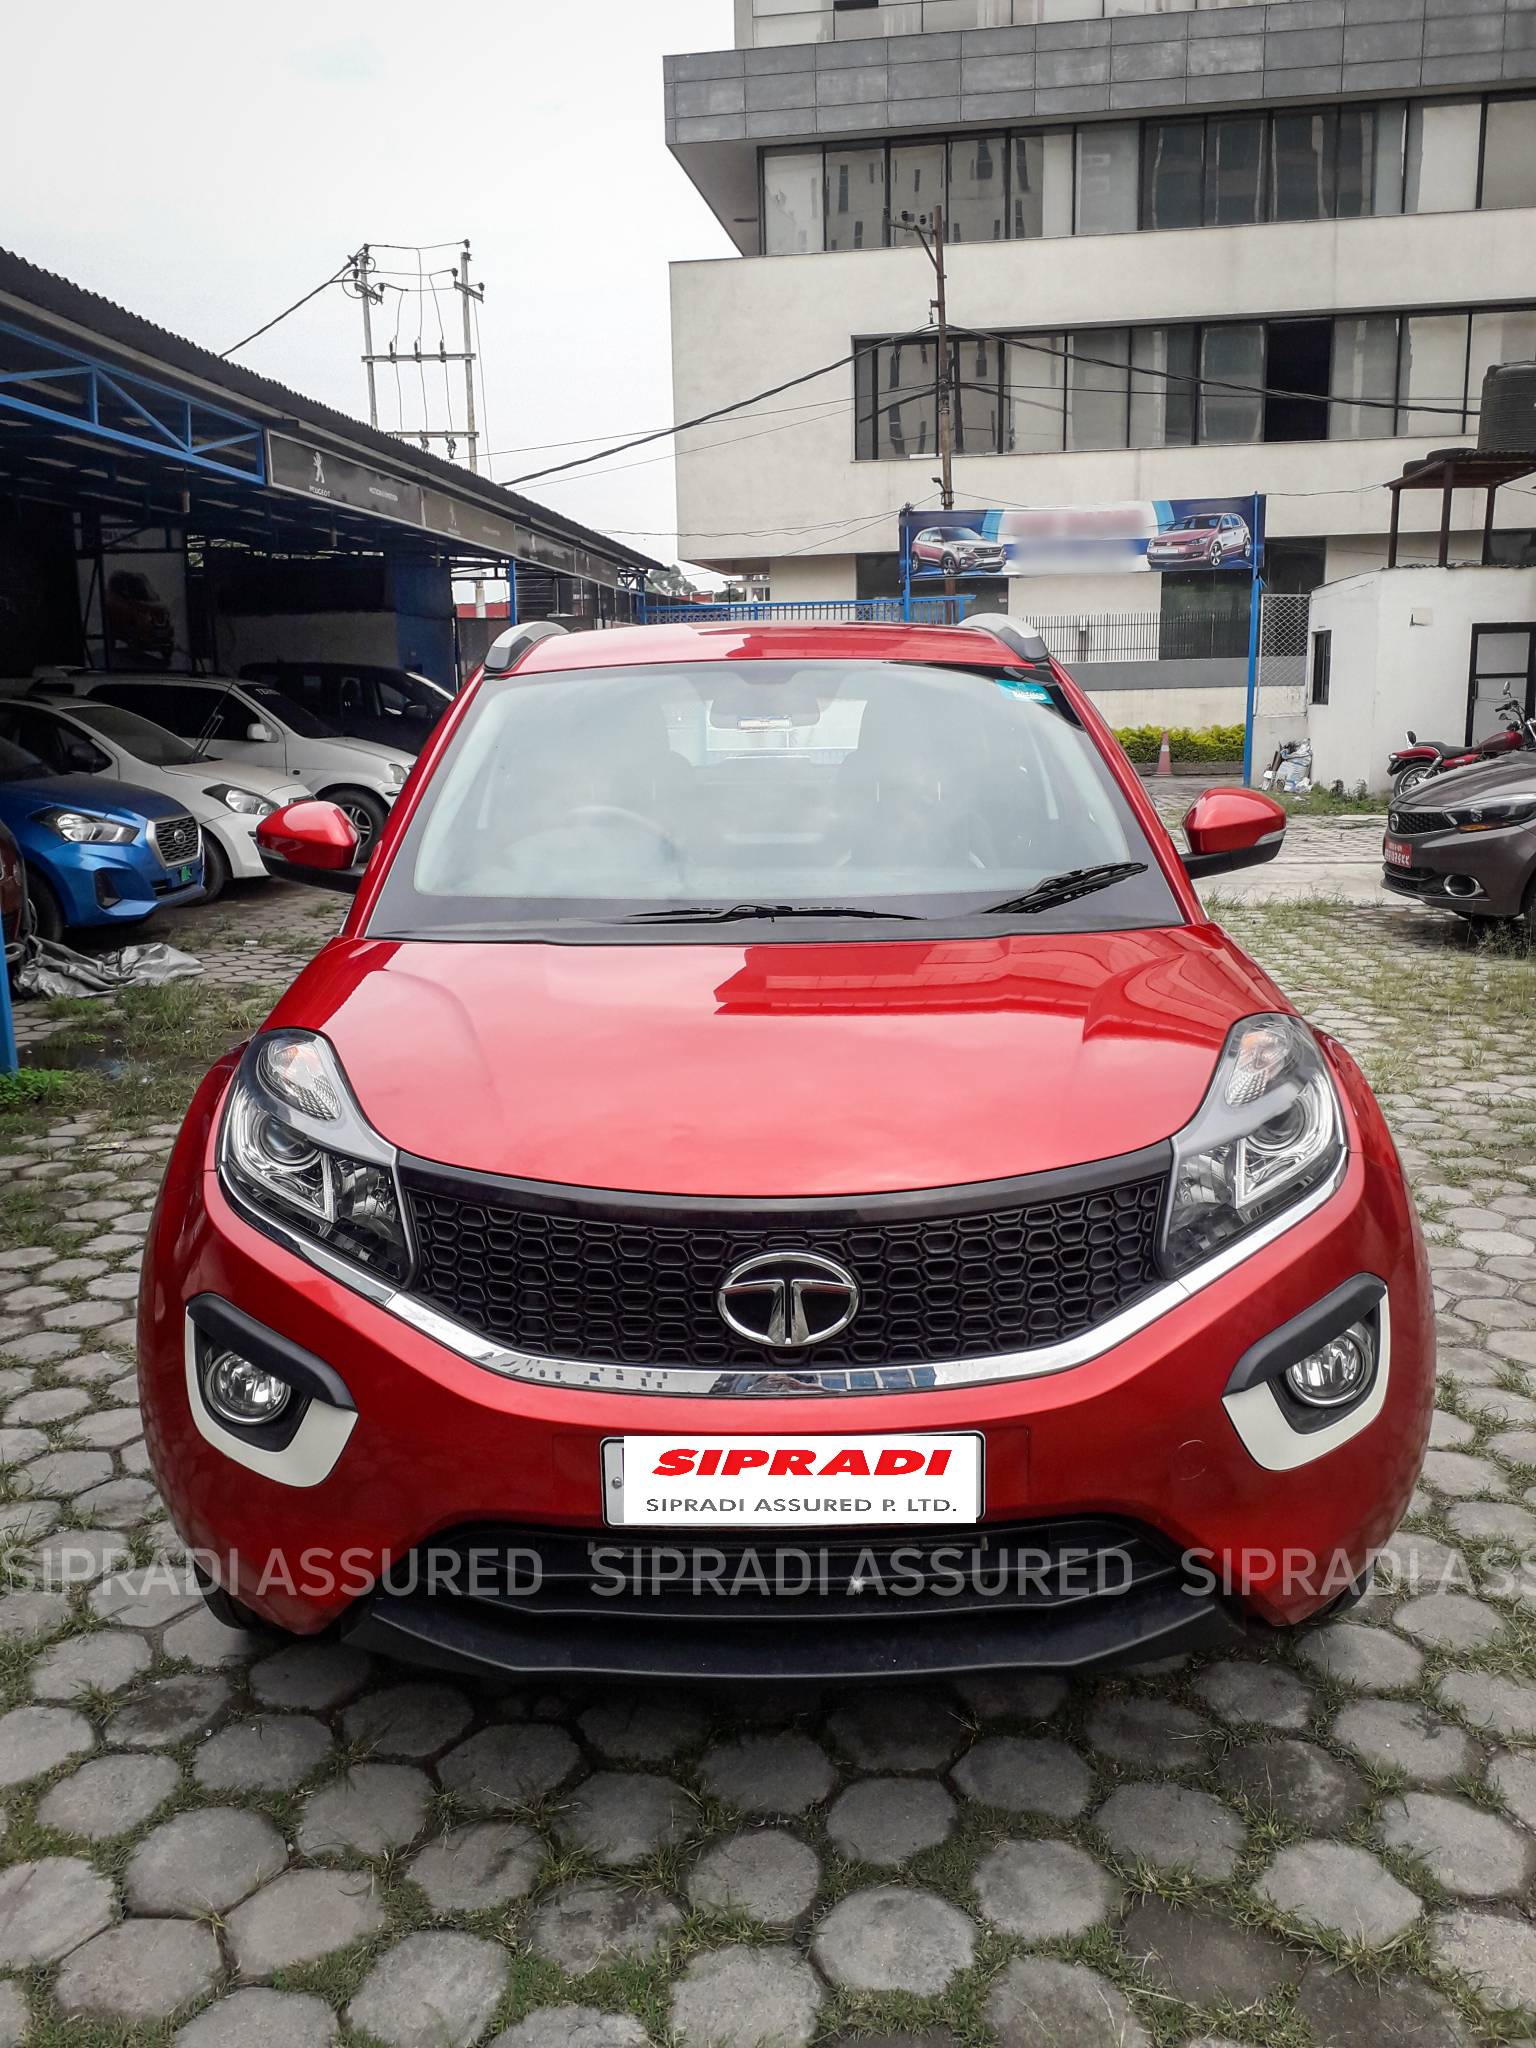 Best secondhand cars in nepal
Pre-owned car
secondhand tata nexon nepal